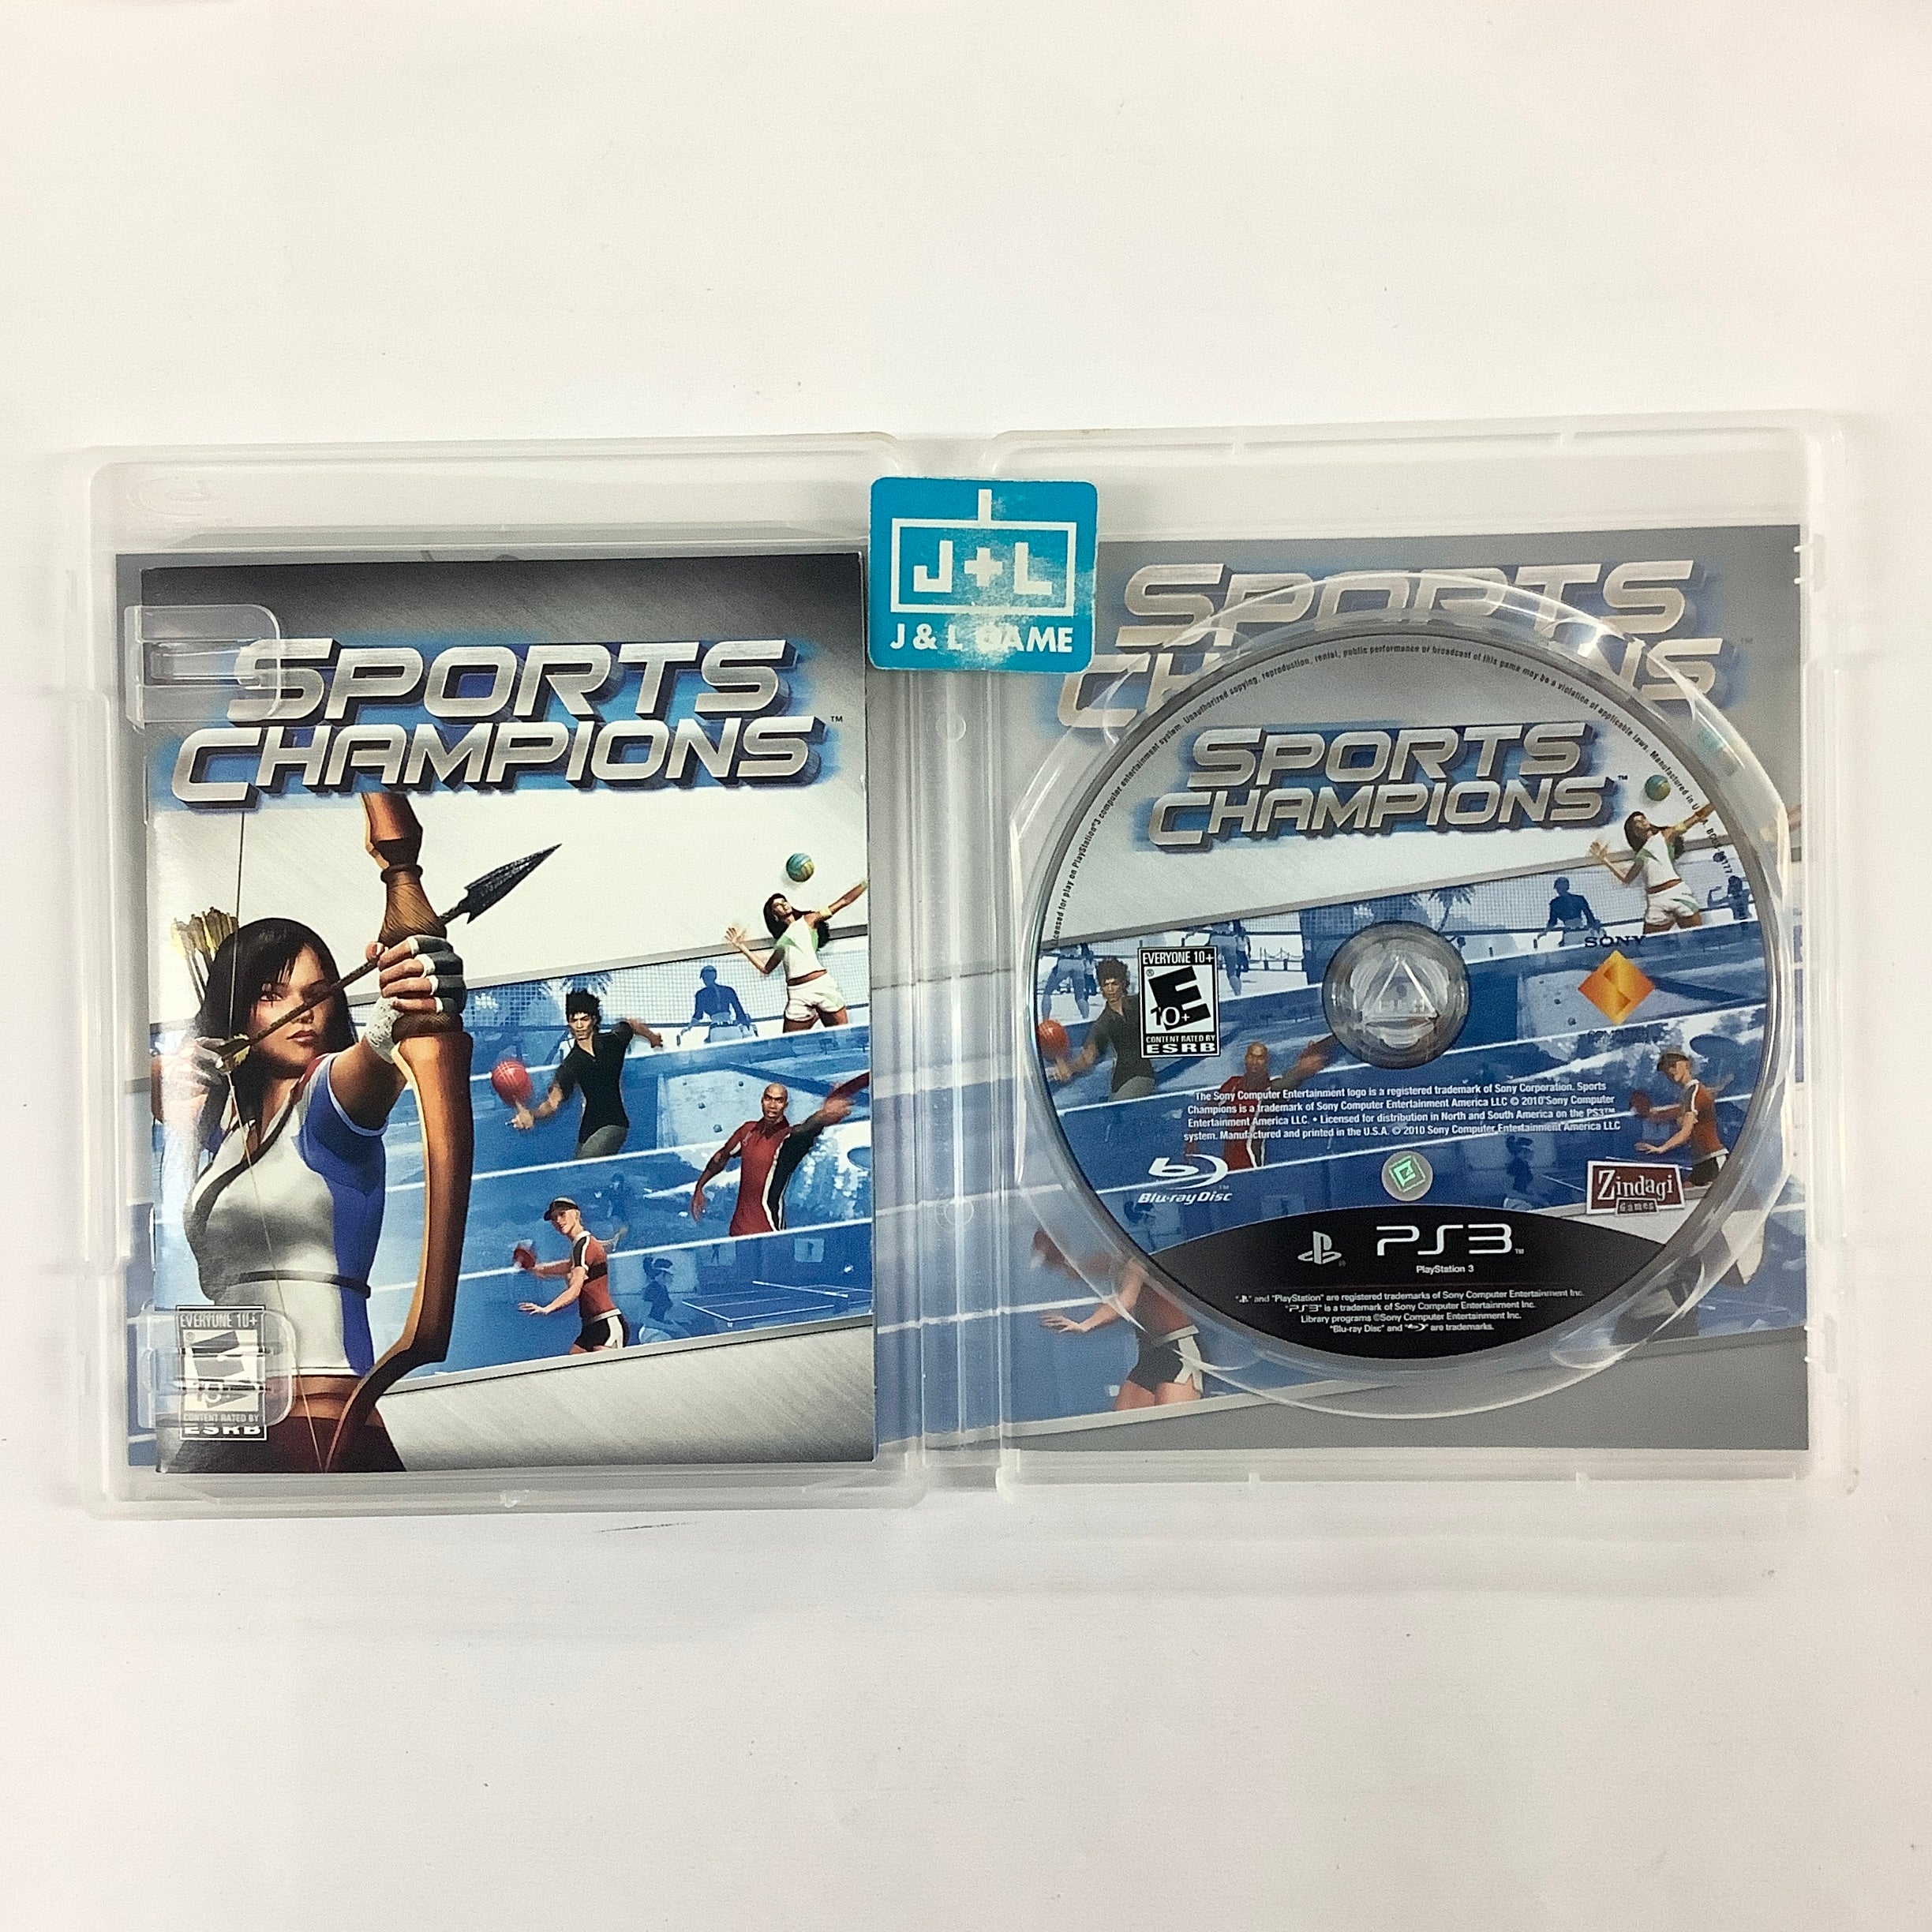 Sports Champions (PlayStation Move Required) - (PS3) PlayStation 3 [Pre-Owned] Video Games SCEA   